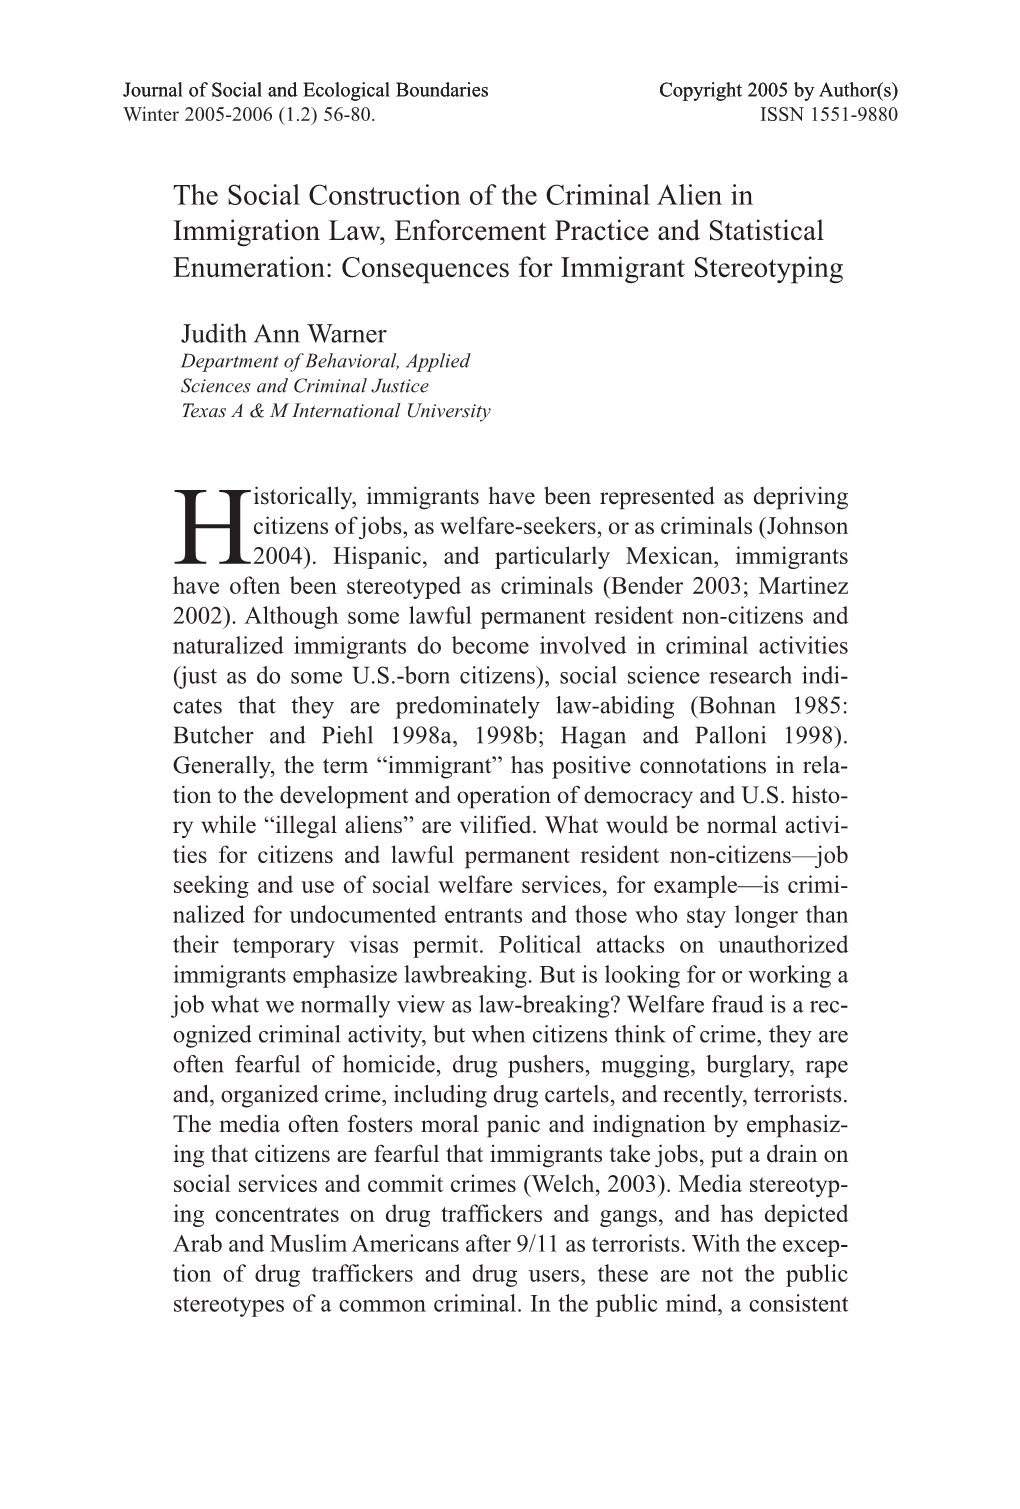 The Social Construction of the Criminal Alien in Immigration Law, Enforcement Practice and Statistical Enumeration: Consequences for Immigrant Stereotyping